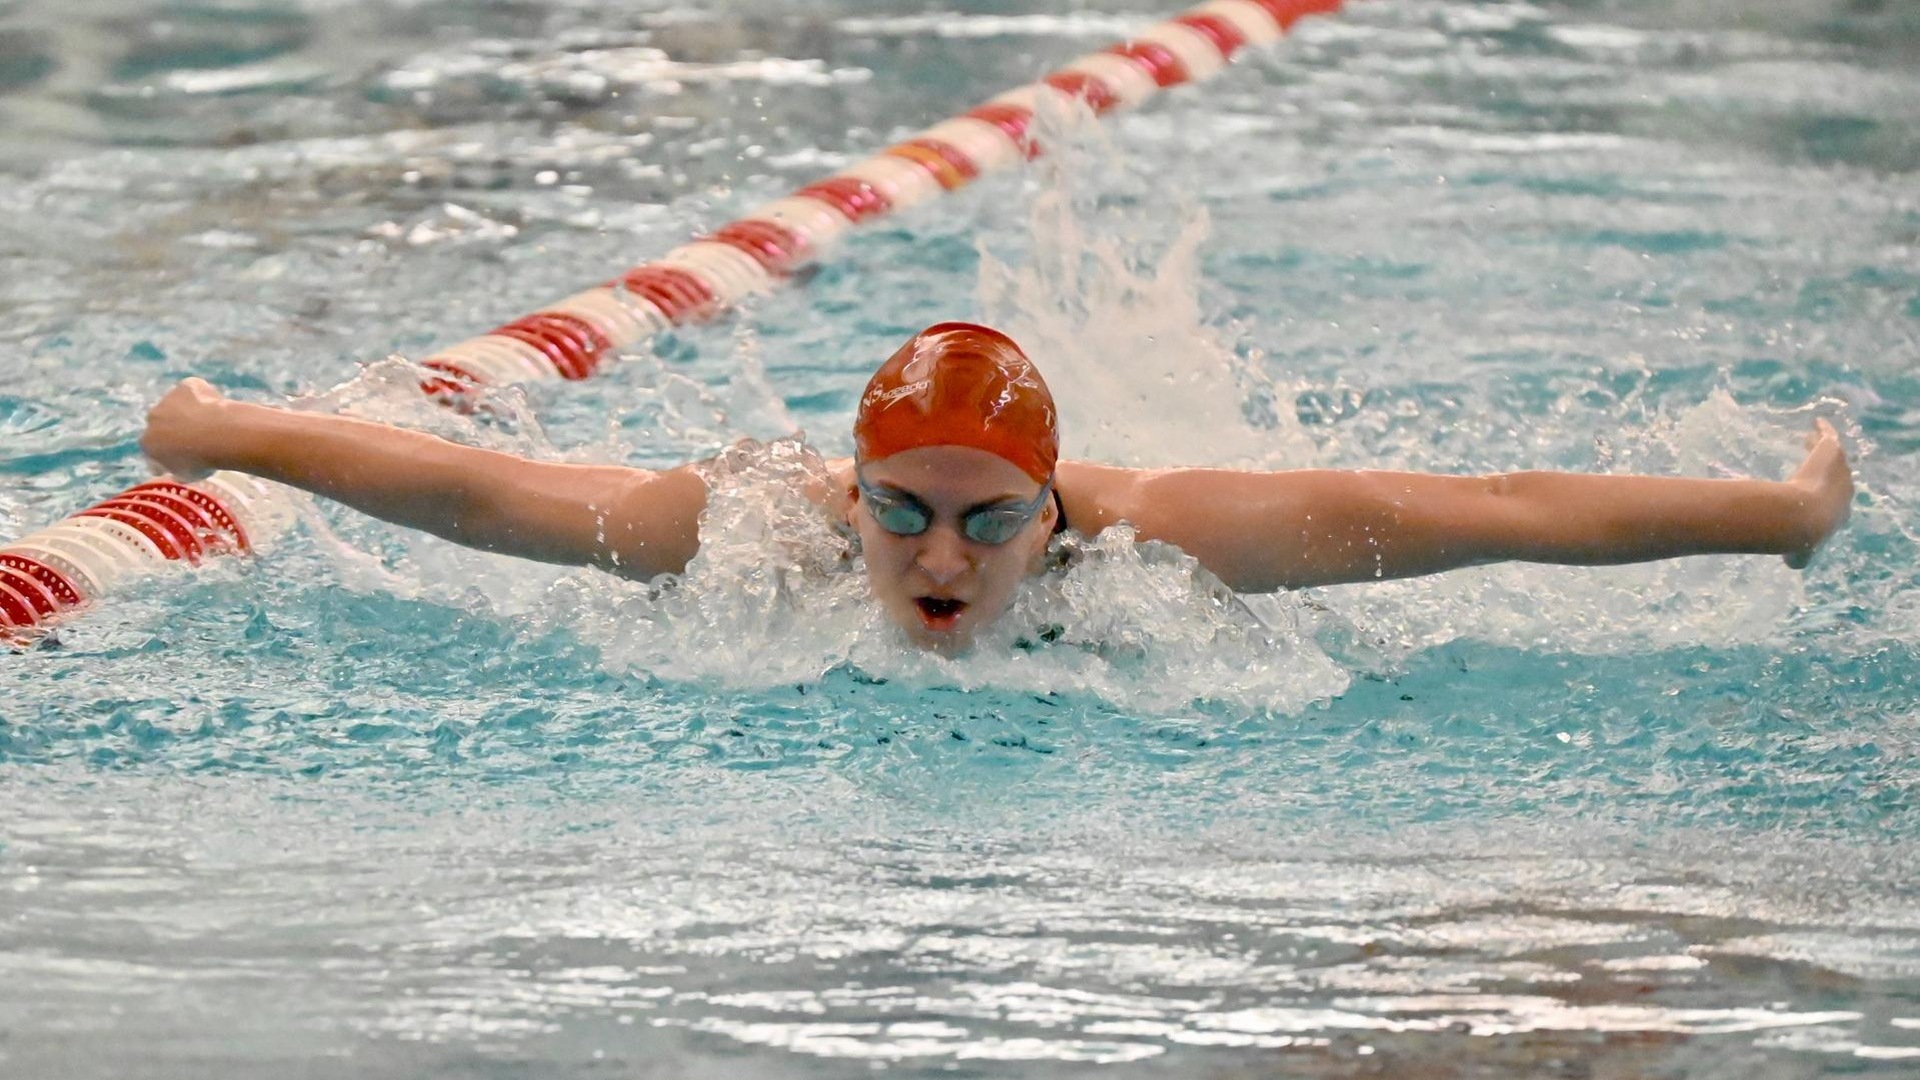 women's swimmer doing butterfly stroke with arms above water